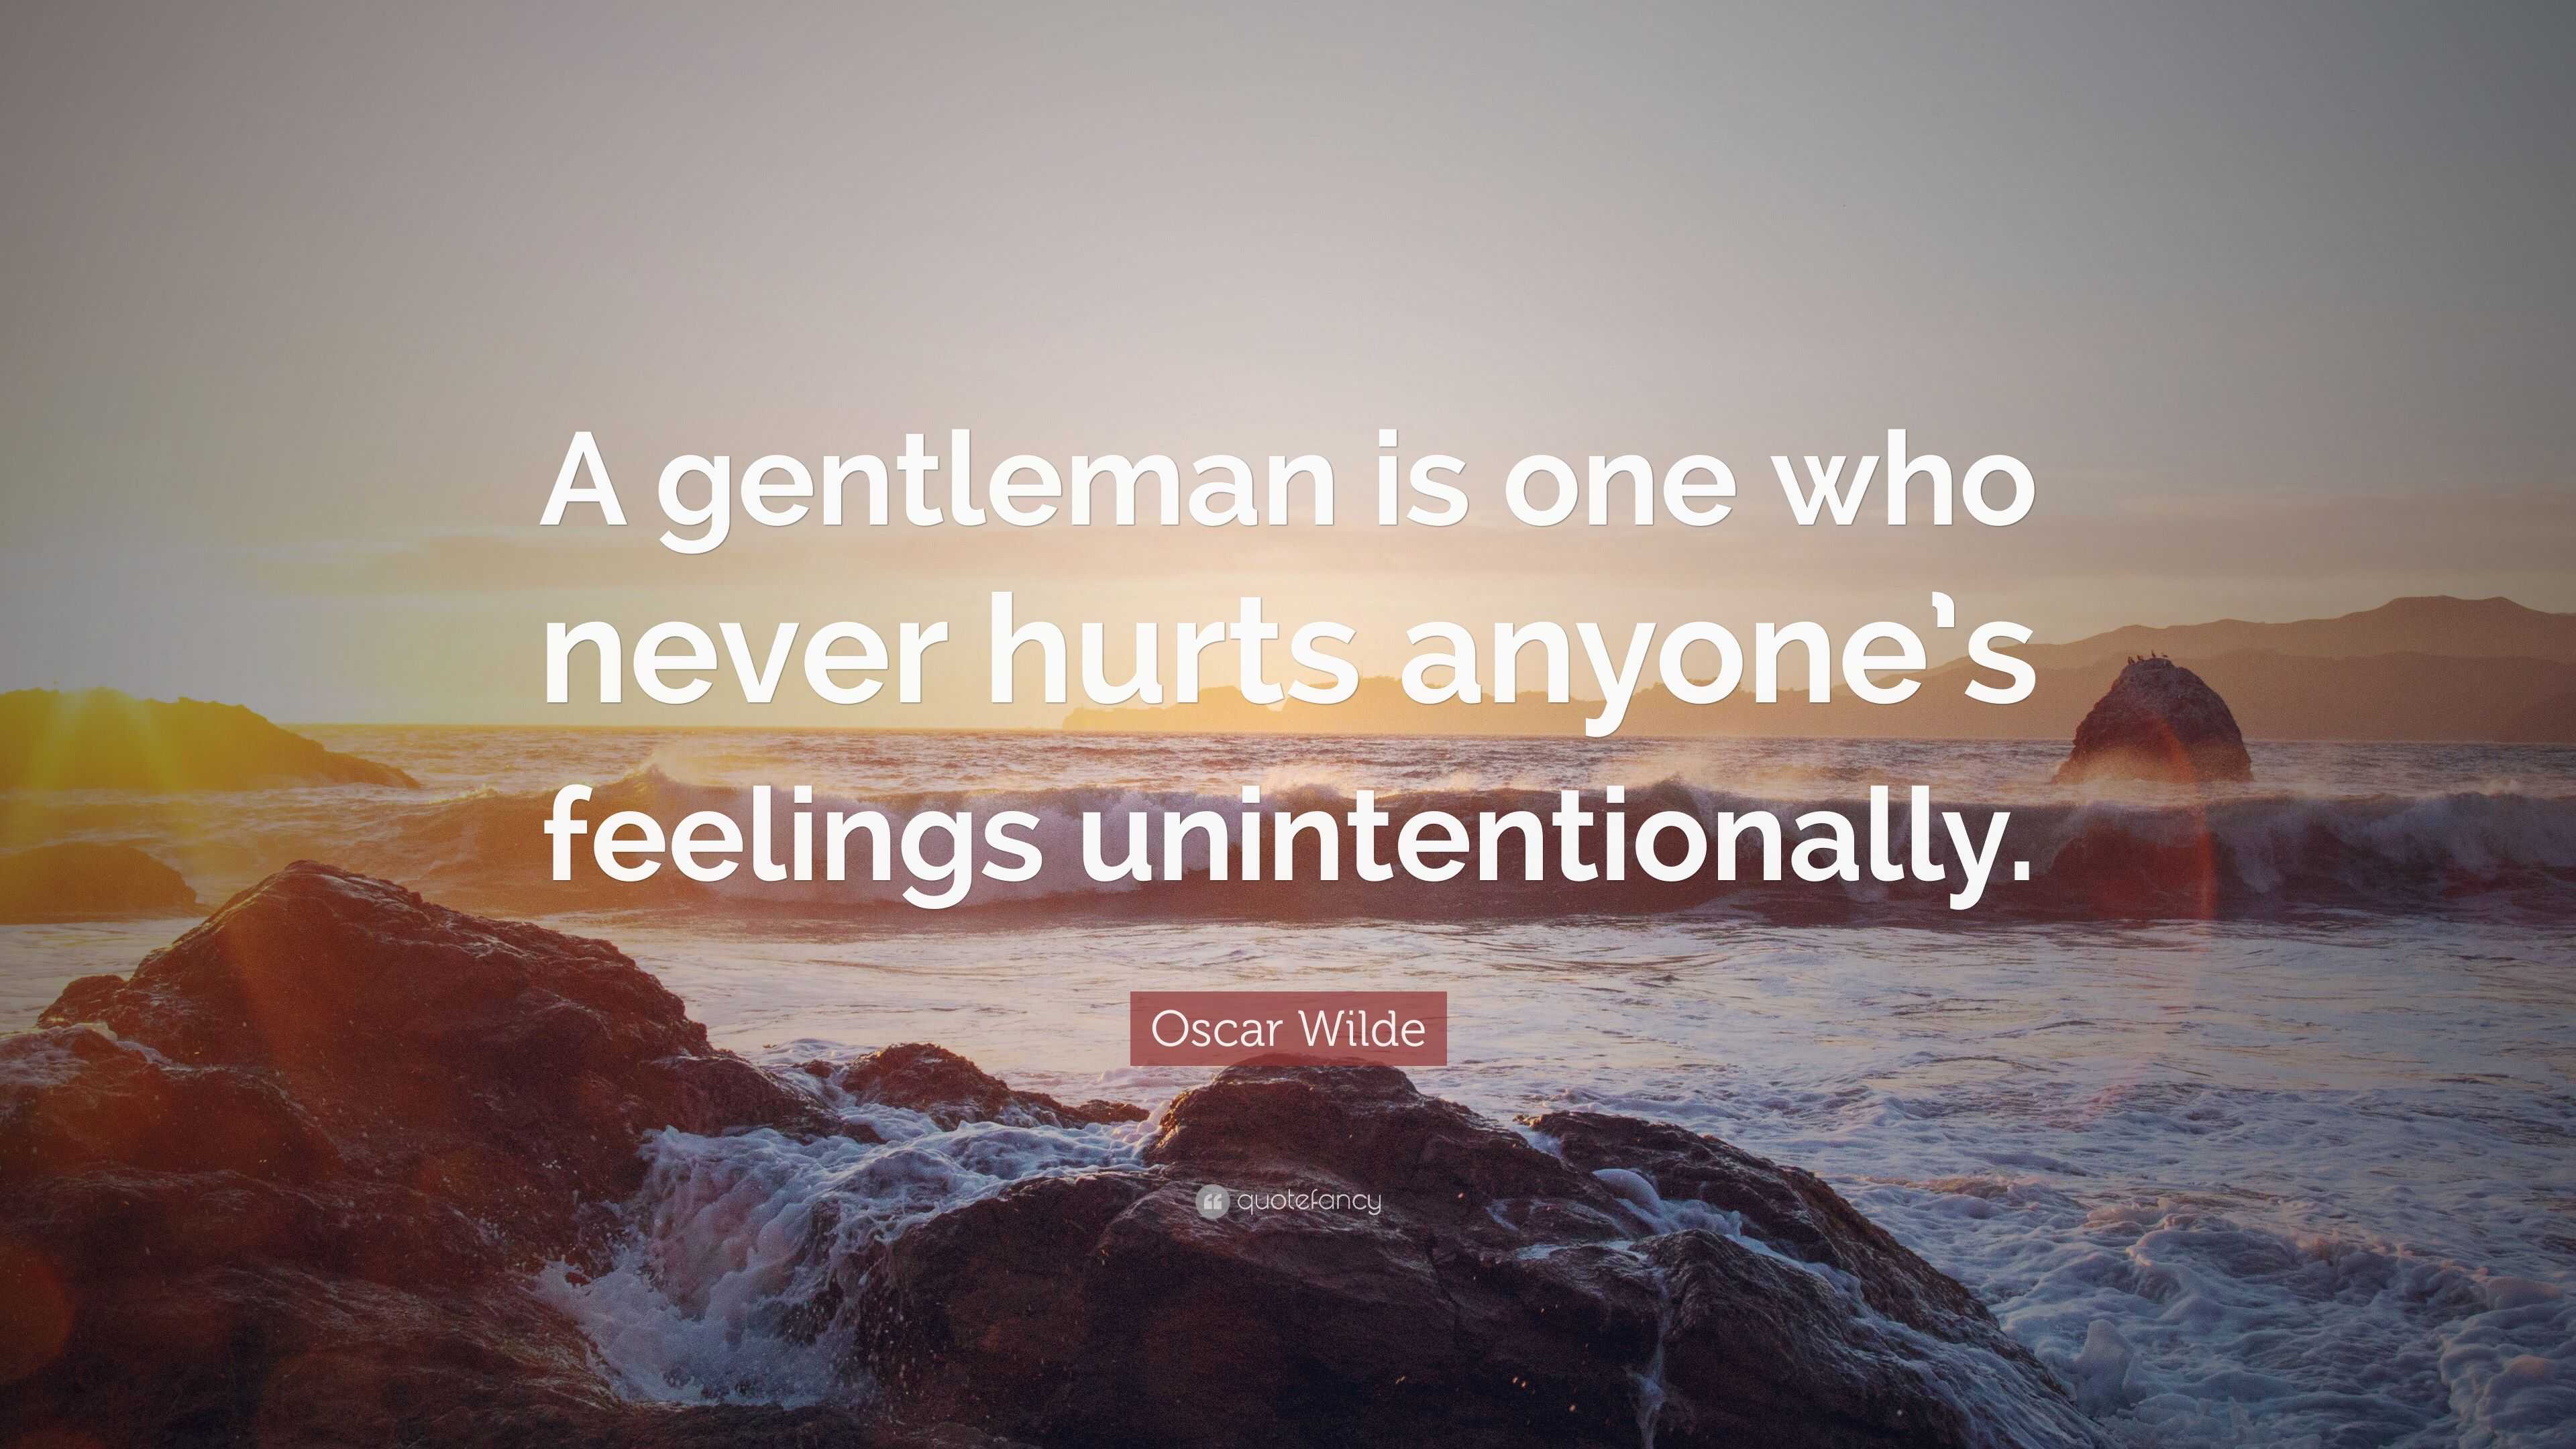 Oscar Wilde Quote “A gentleman is one who never hurts anyone s feelings unintentionally